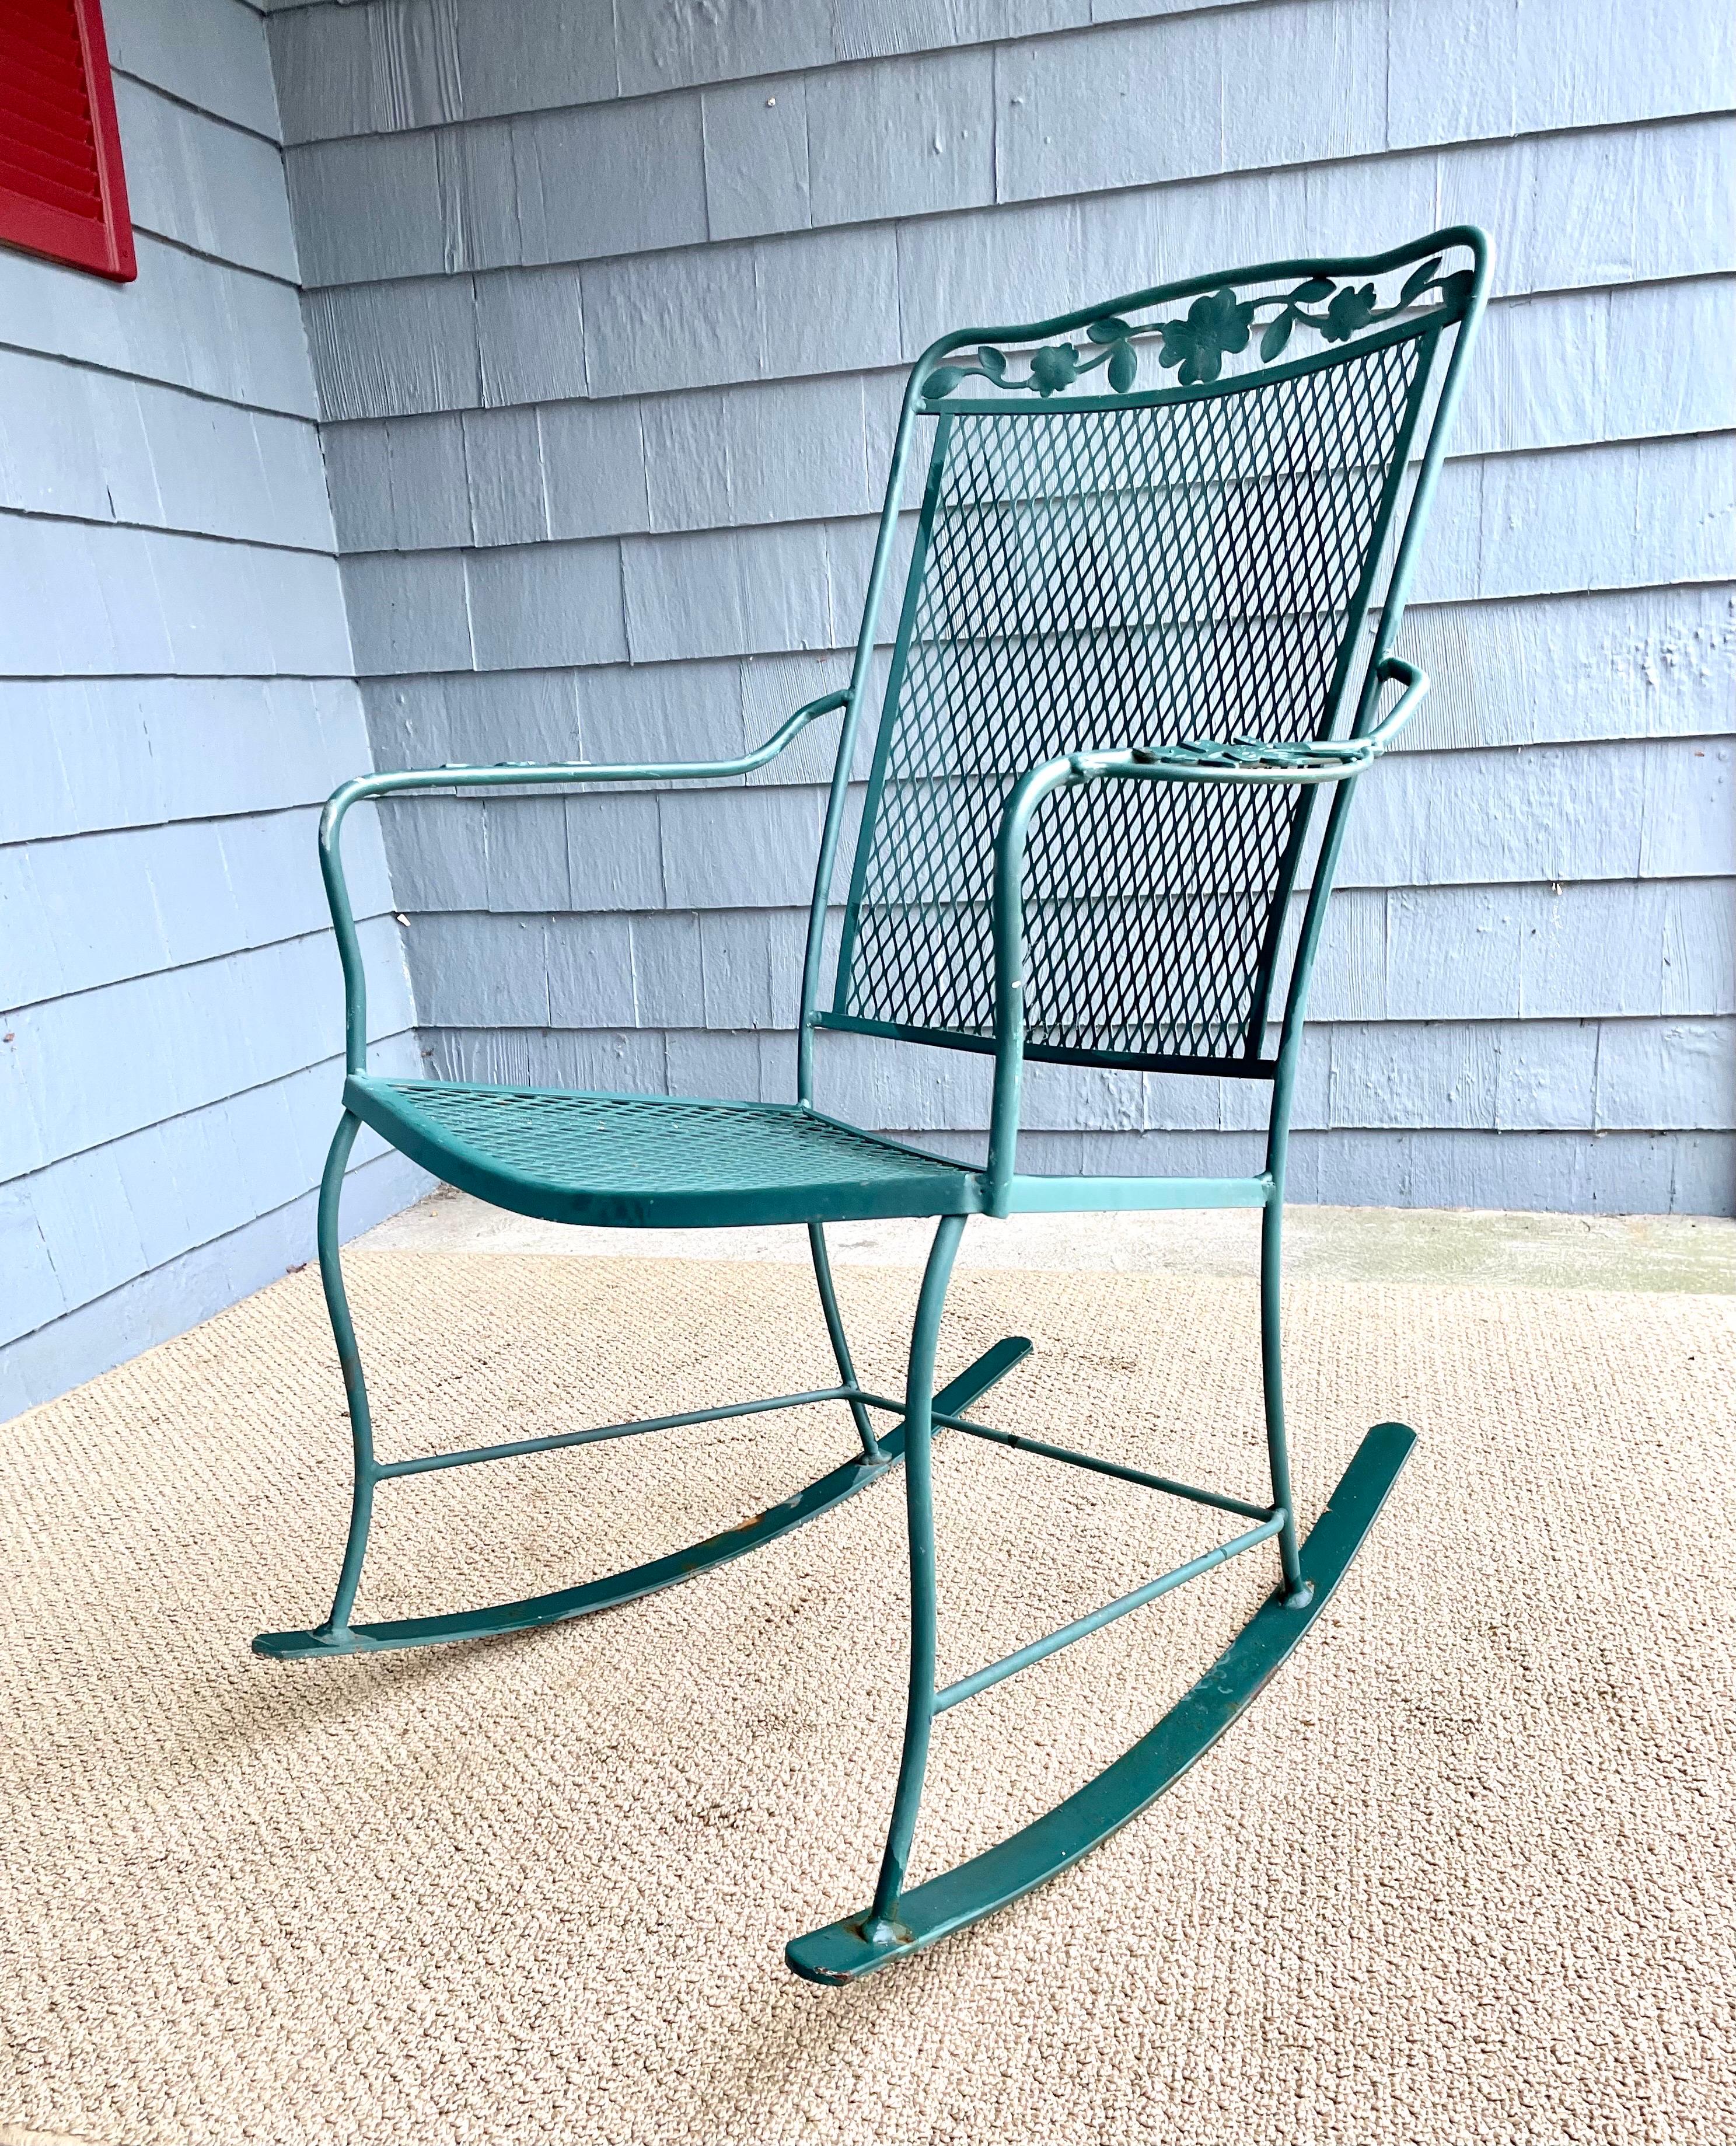 Available now for your enjoyment and ready to ship is a Vintage Wrought Iron Outdoor Patio Rocker Arm Chair

This lovely Wrought Iron Rocker Chair is the perfect addition to any garden, terrace, or veranda. Enjoy a glass of lemonade in the late